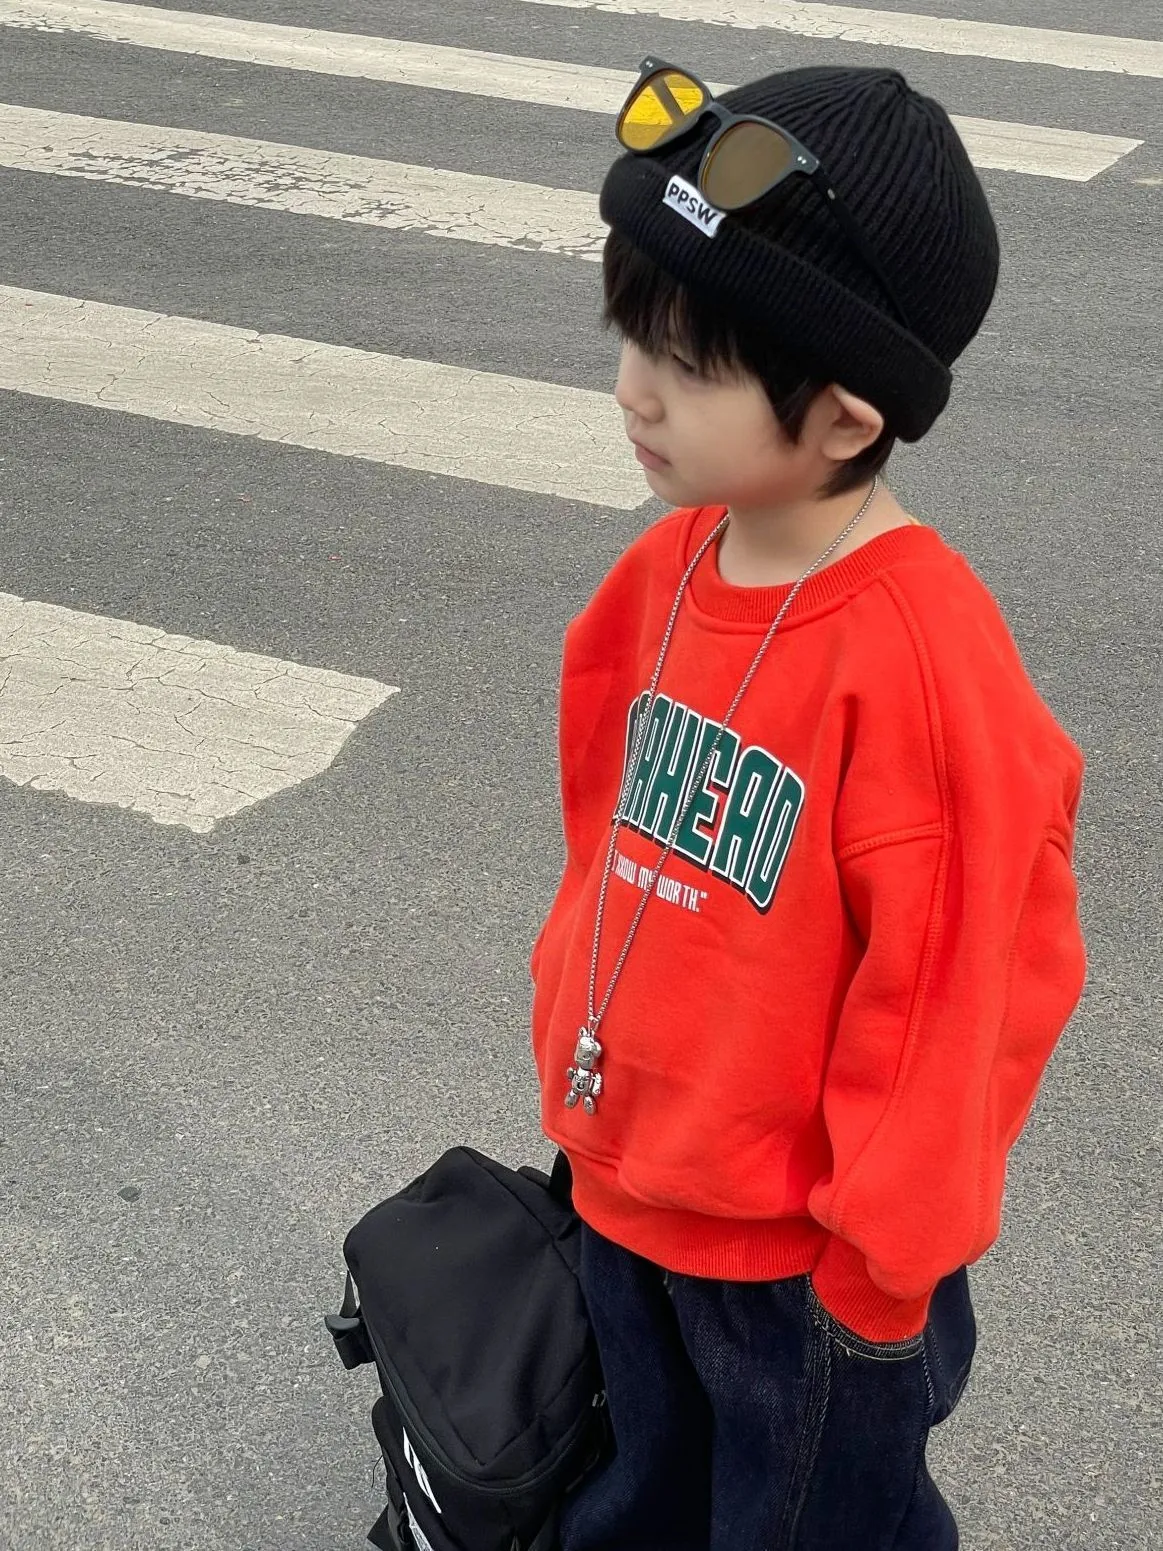 T shirts Thermal Pullover for Boys and Babies in Autumn Winter of children's Hoodless Sweater with High Quality 2 12 Old 230627